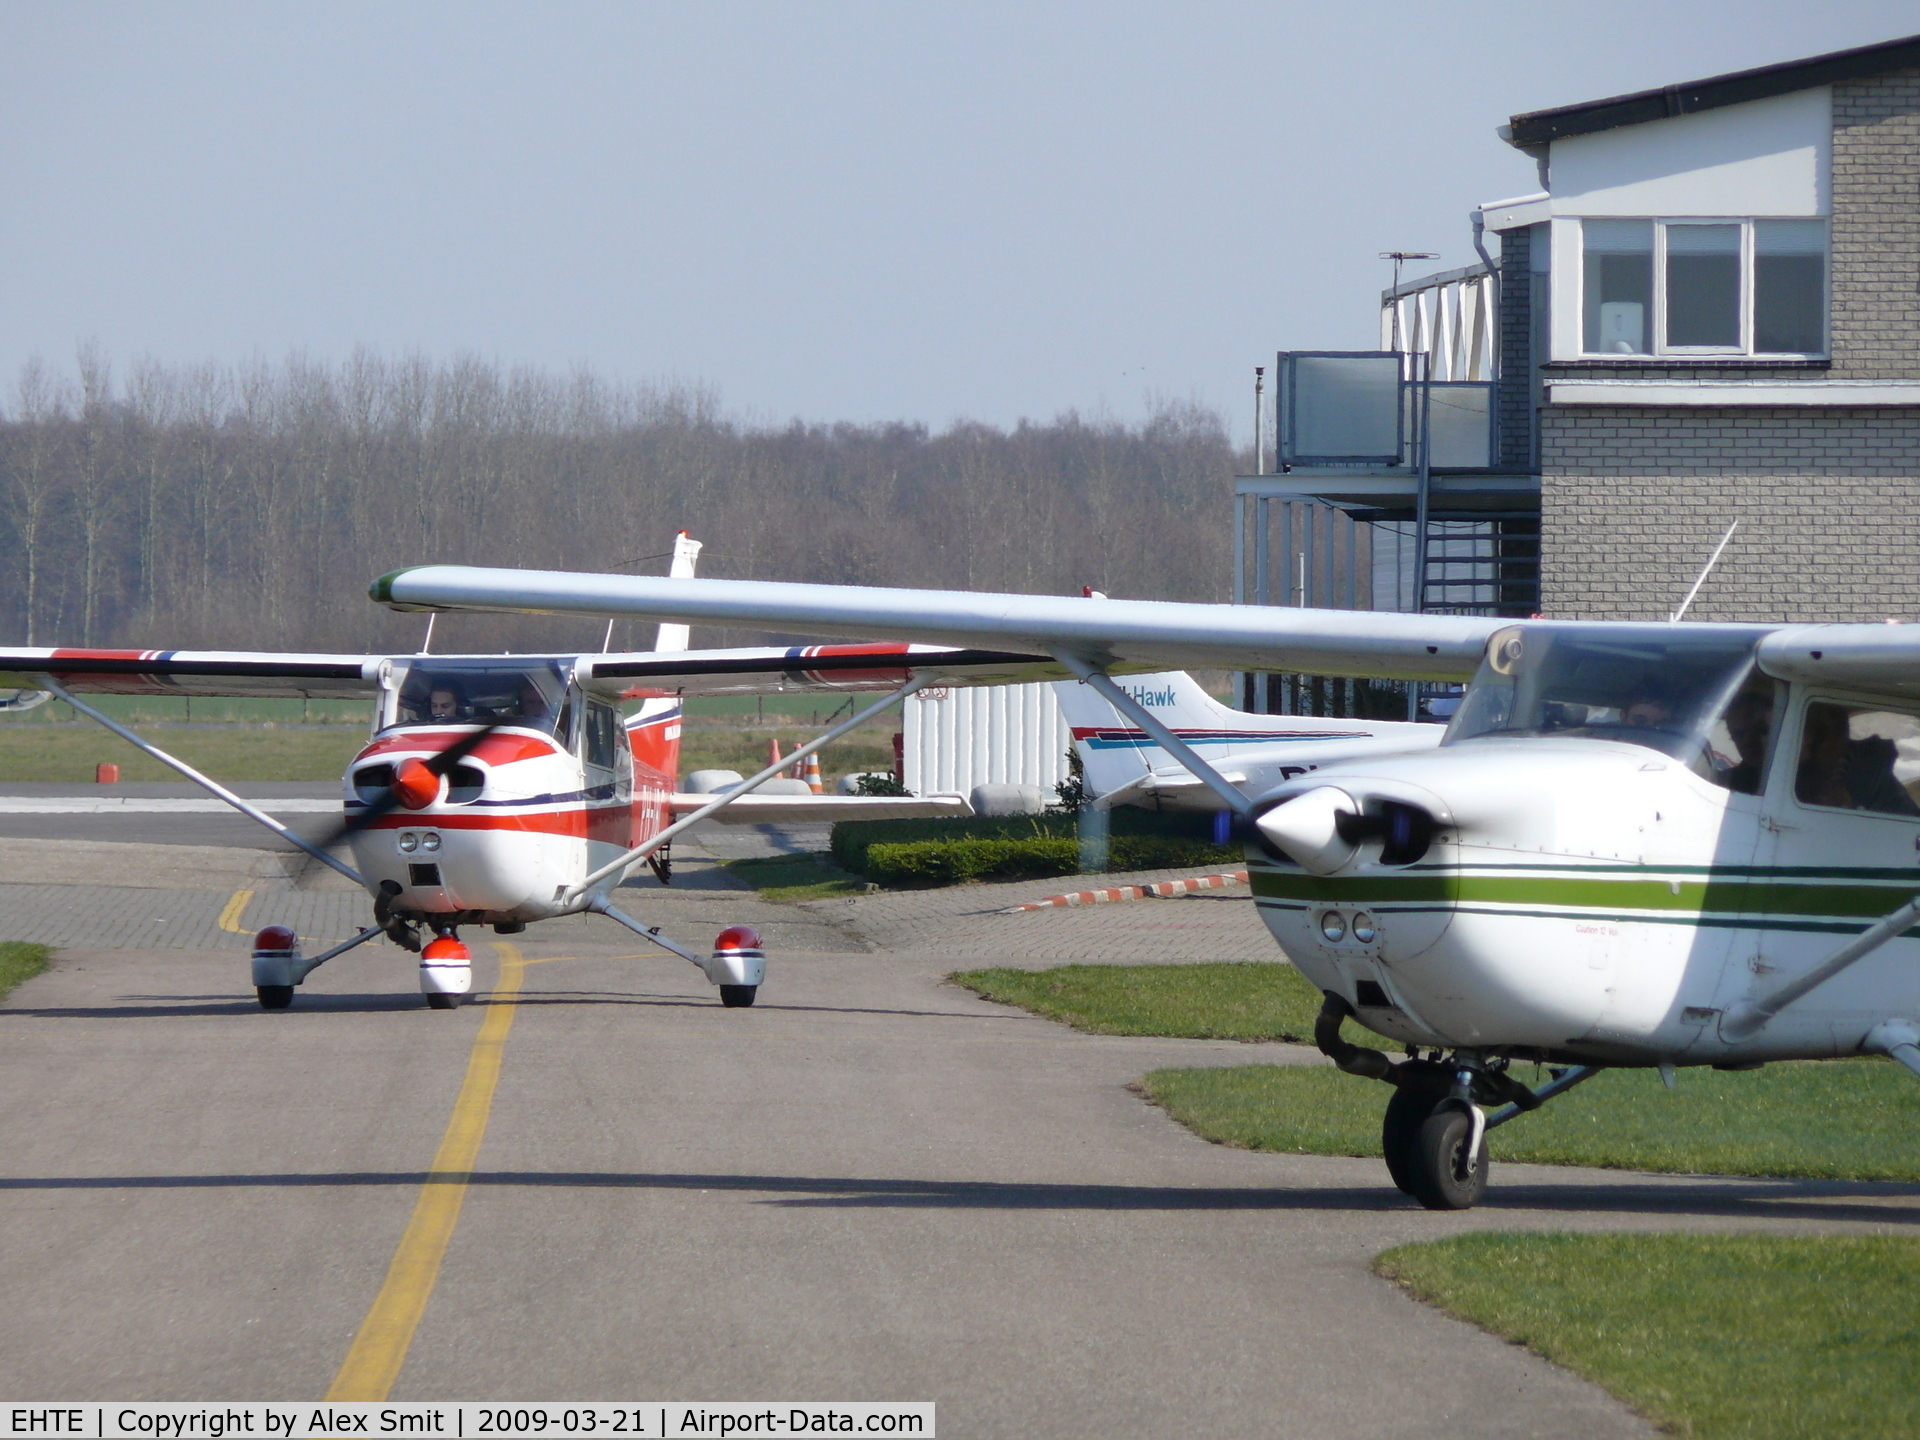 Teuge International Airport, Deventer Netherlands (EHTE) - Traffic at Teuge Airport